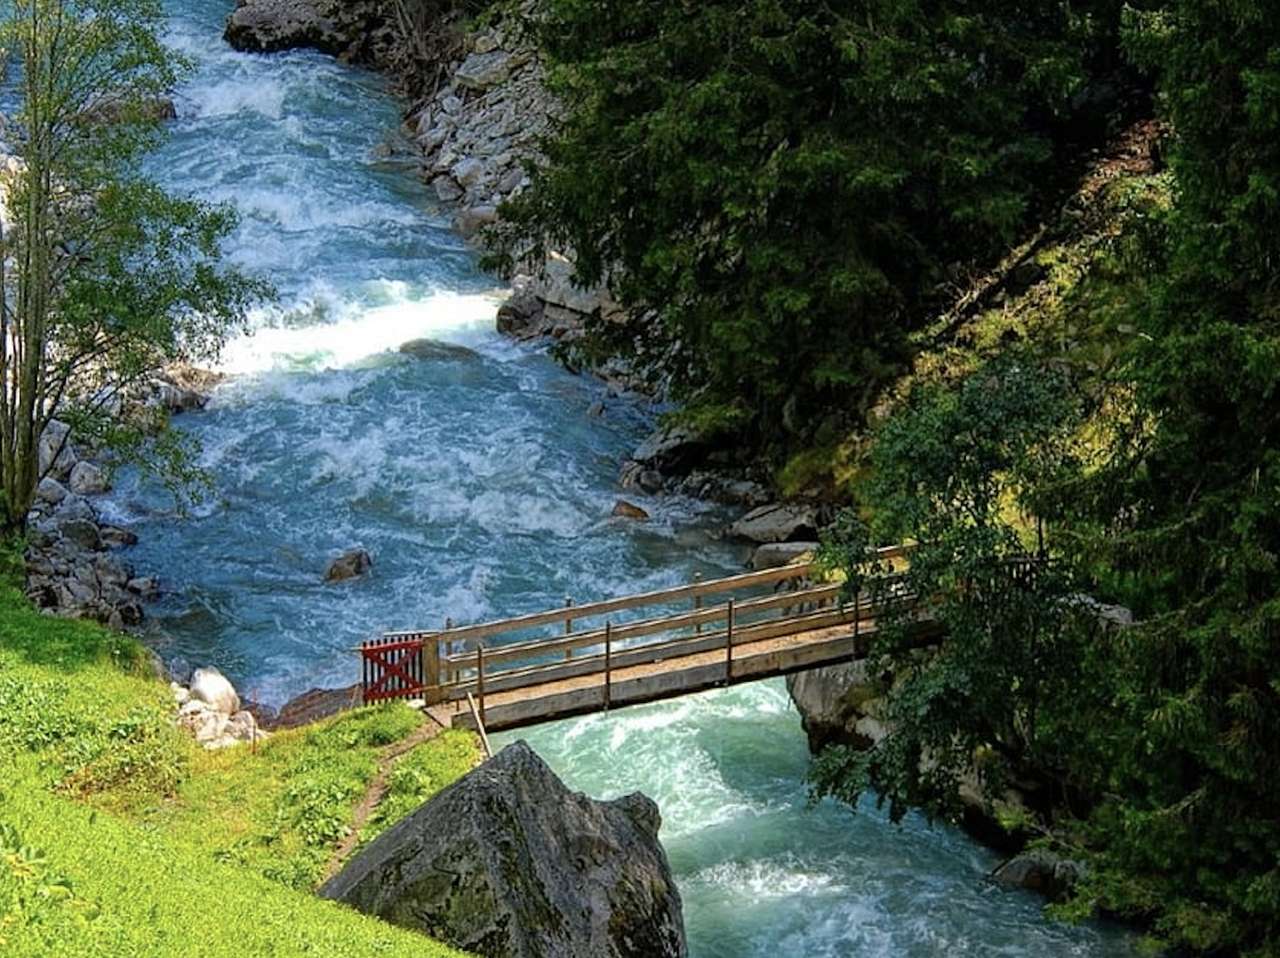 A small bridge over a raging river, a charming view jigsaw puzzle online